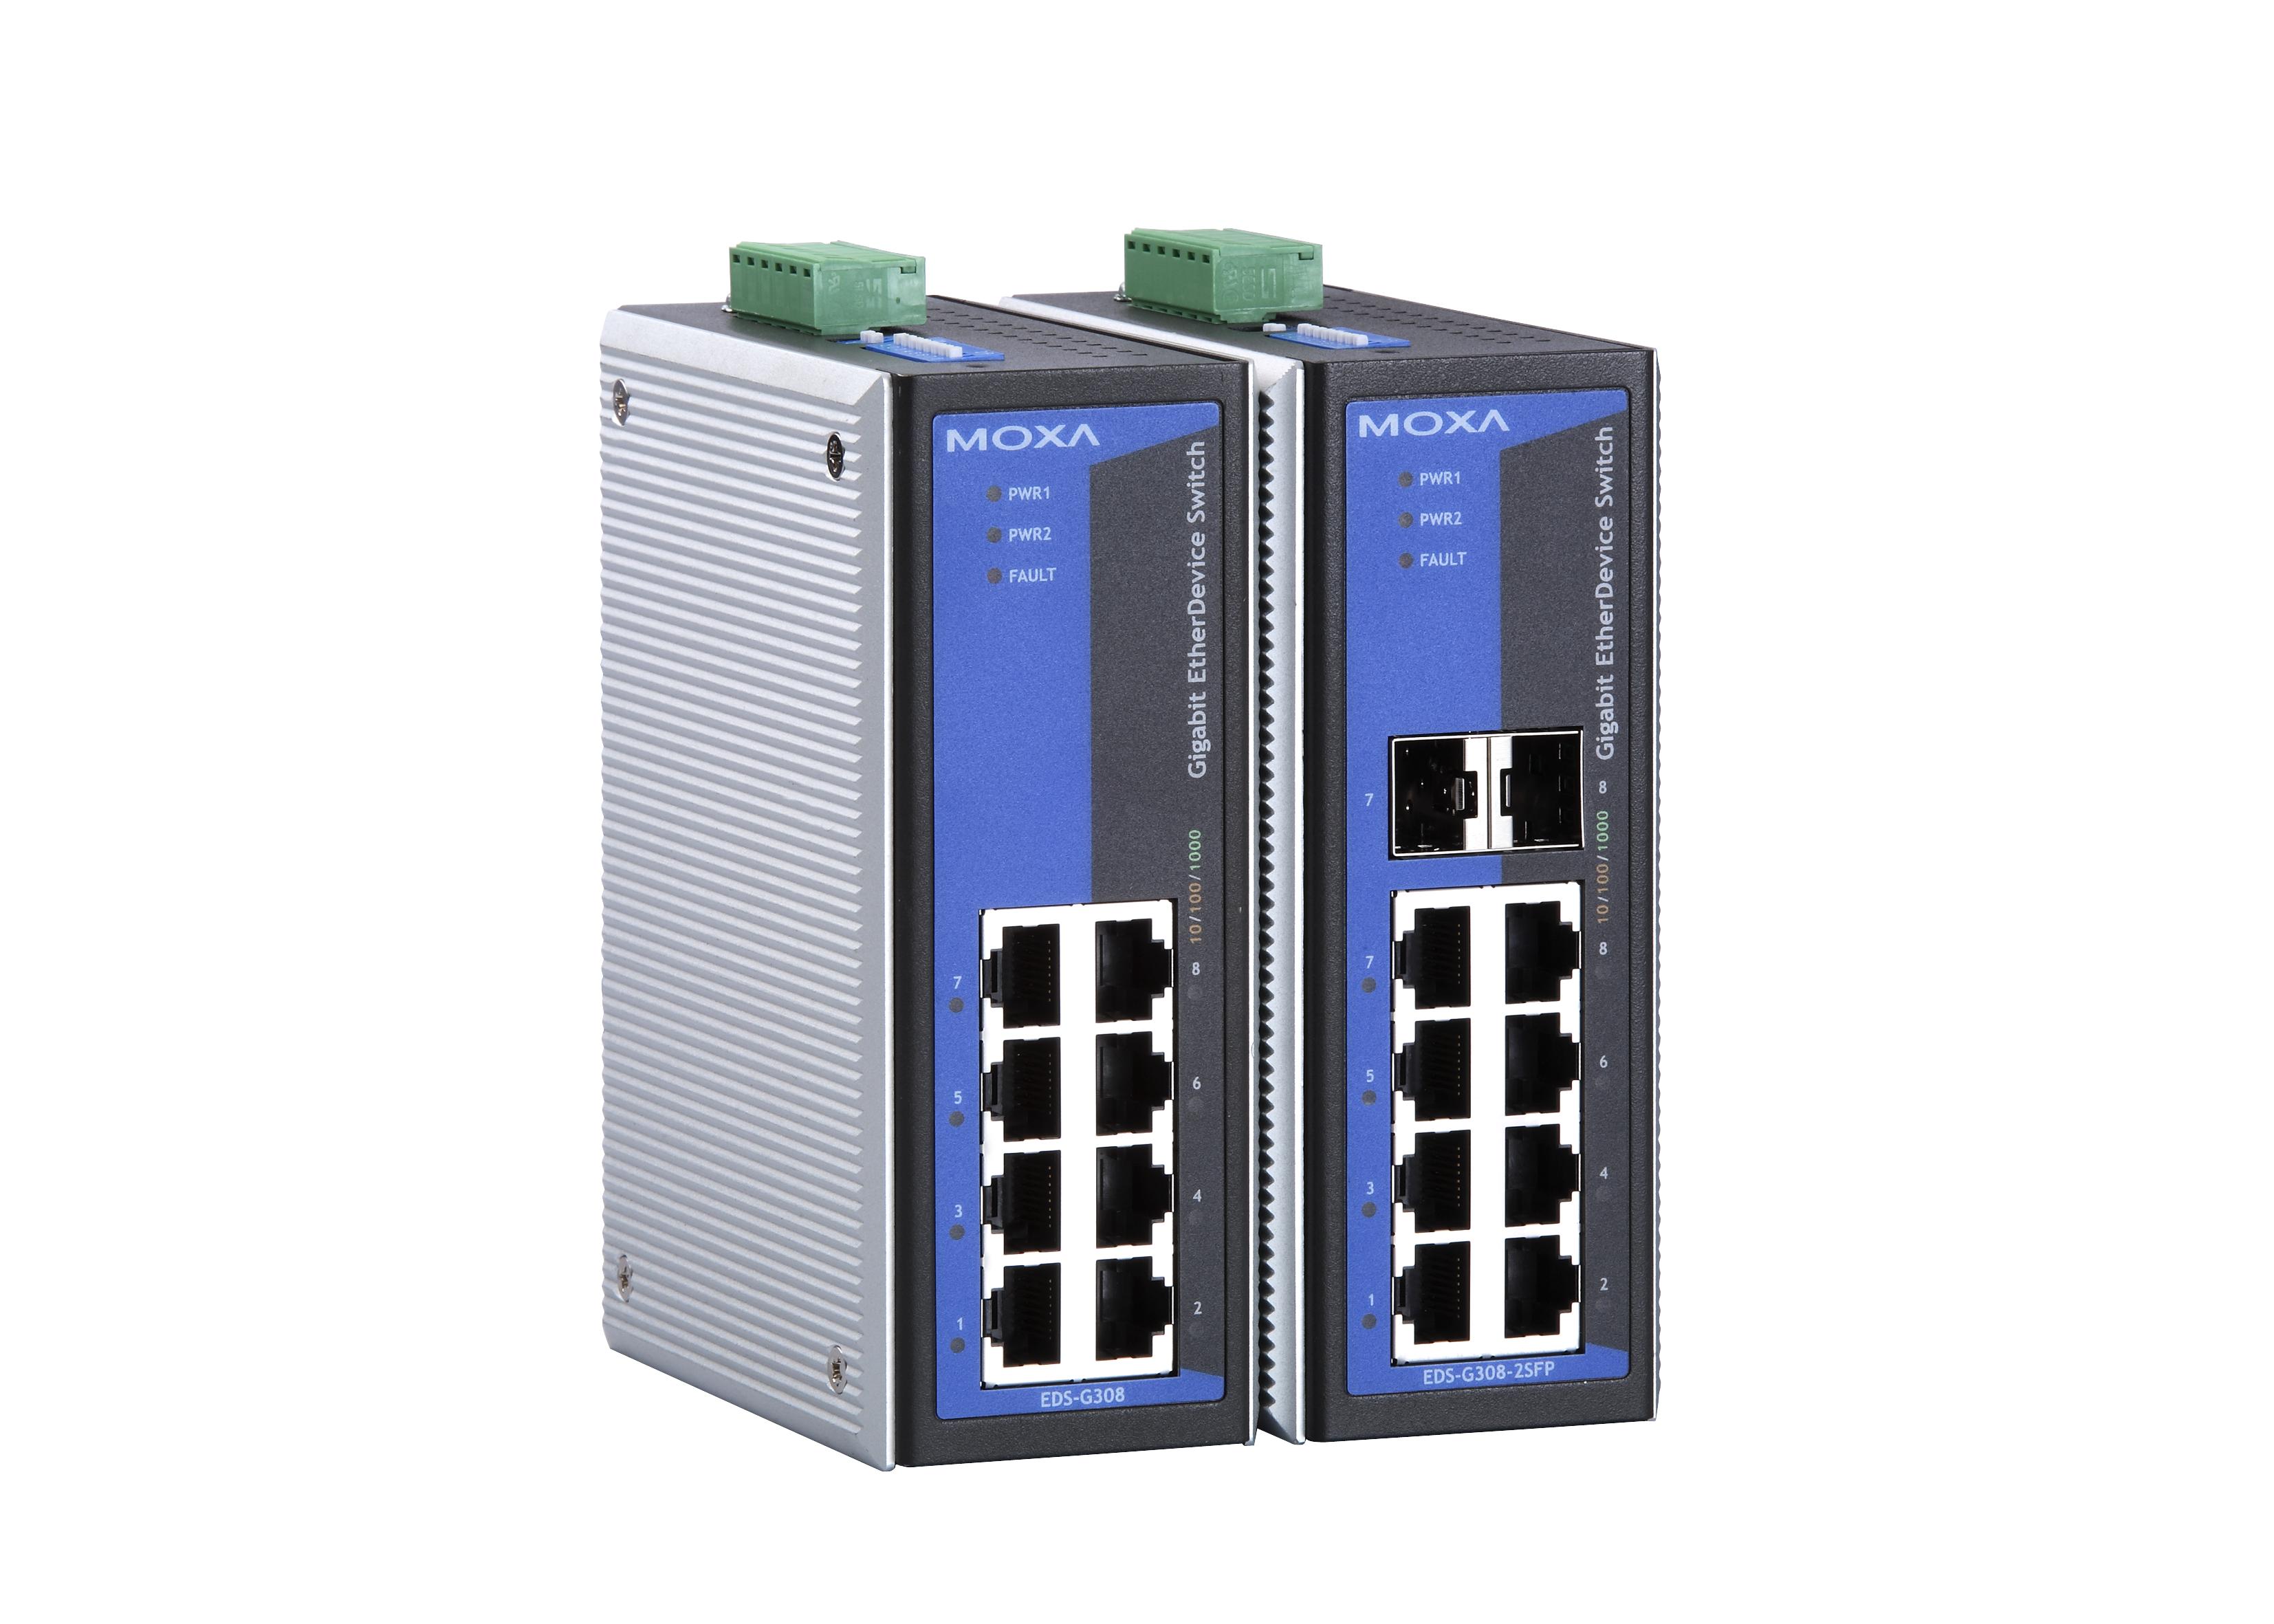 EDS-G308 Series:Unmanaged full Gigabit Ethernet switch with 8 10